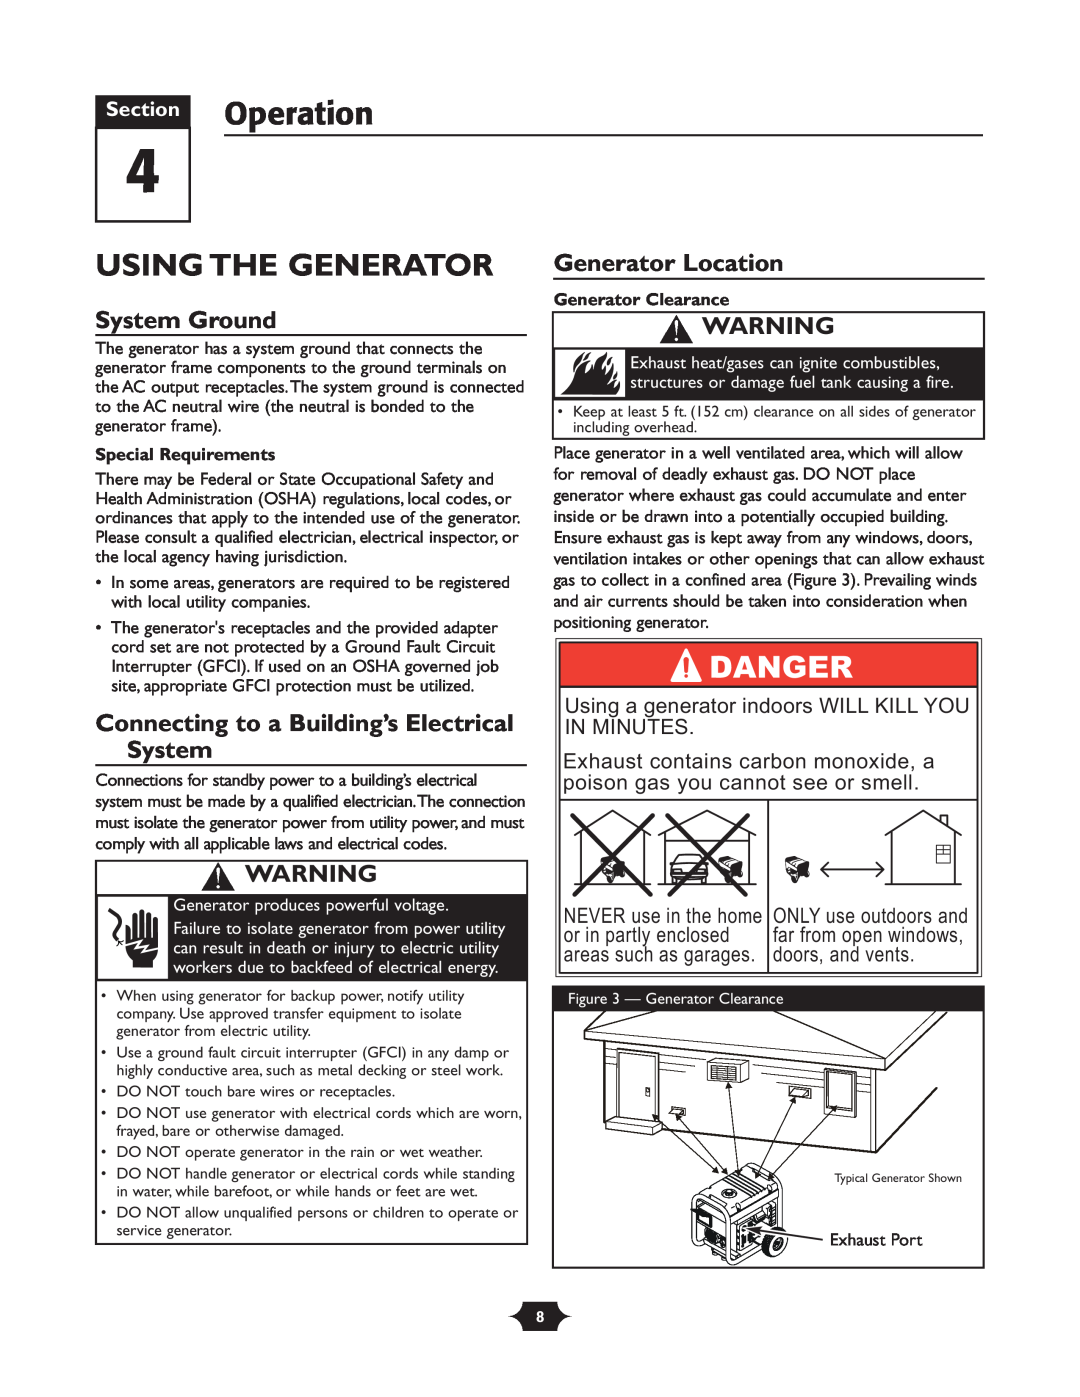 Troy-Bilt 030245 manual Section Operation, Using The Generator, System Ground, Connecting to a Building’s Electrical System 